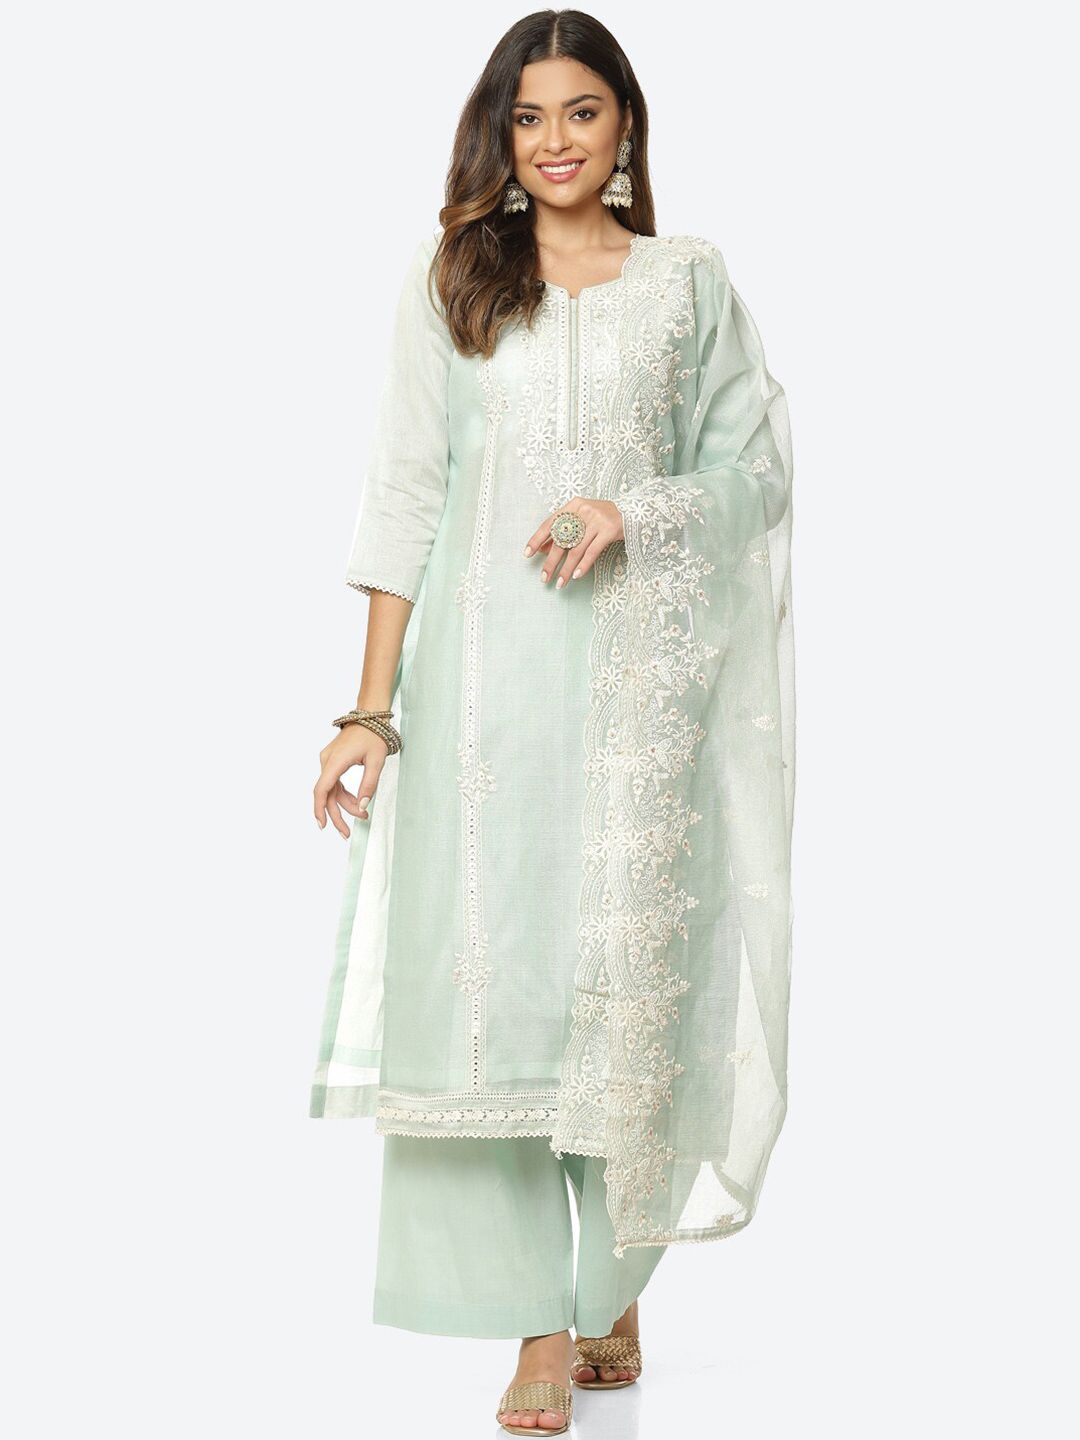 Meena Bazaar Green & White Embroidered Unstitched Dress Material Price in India